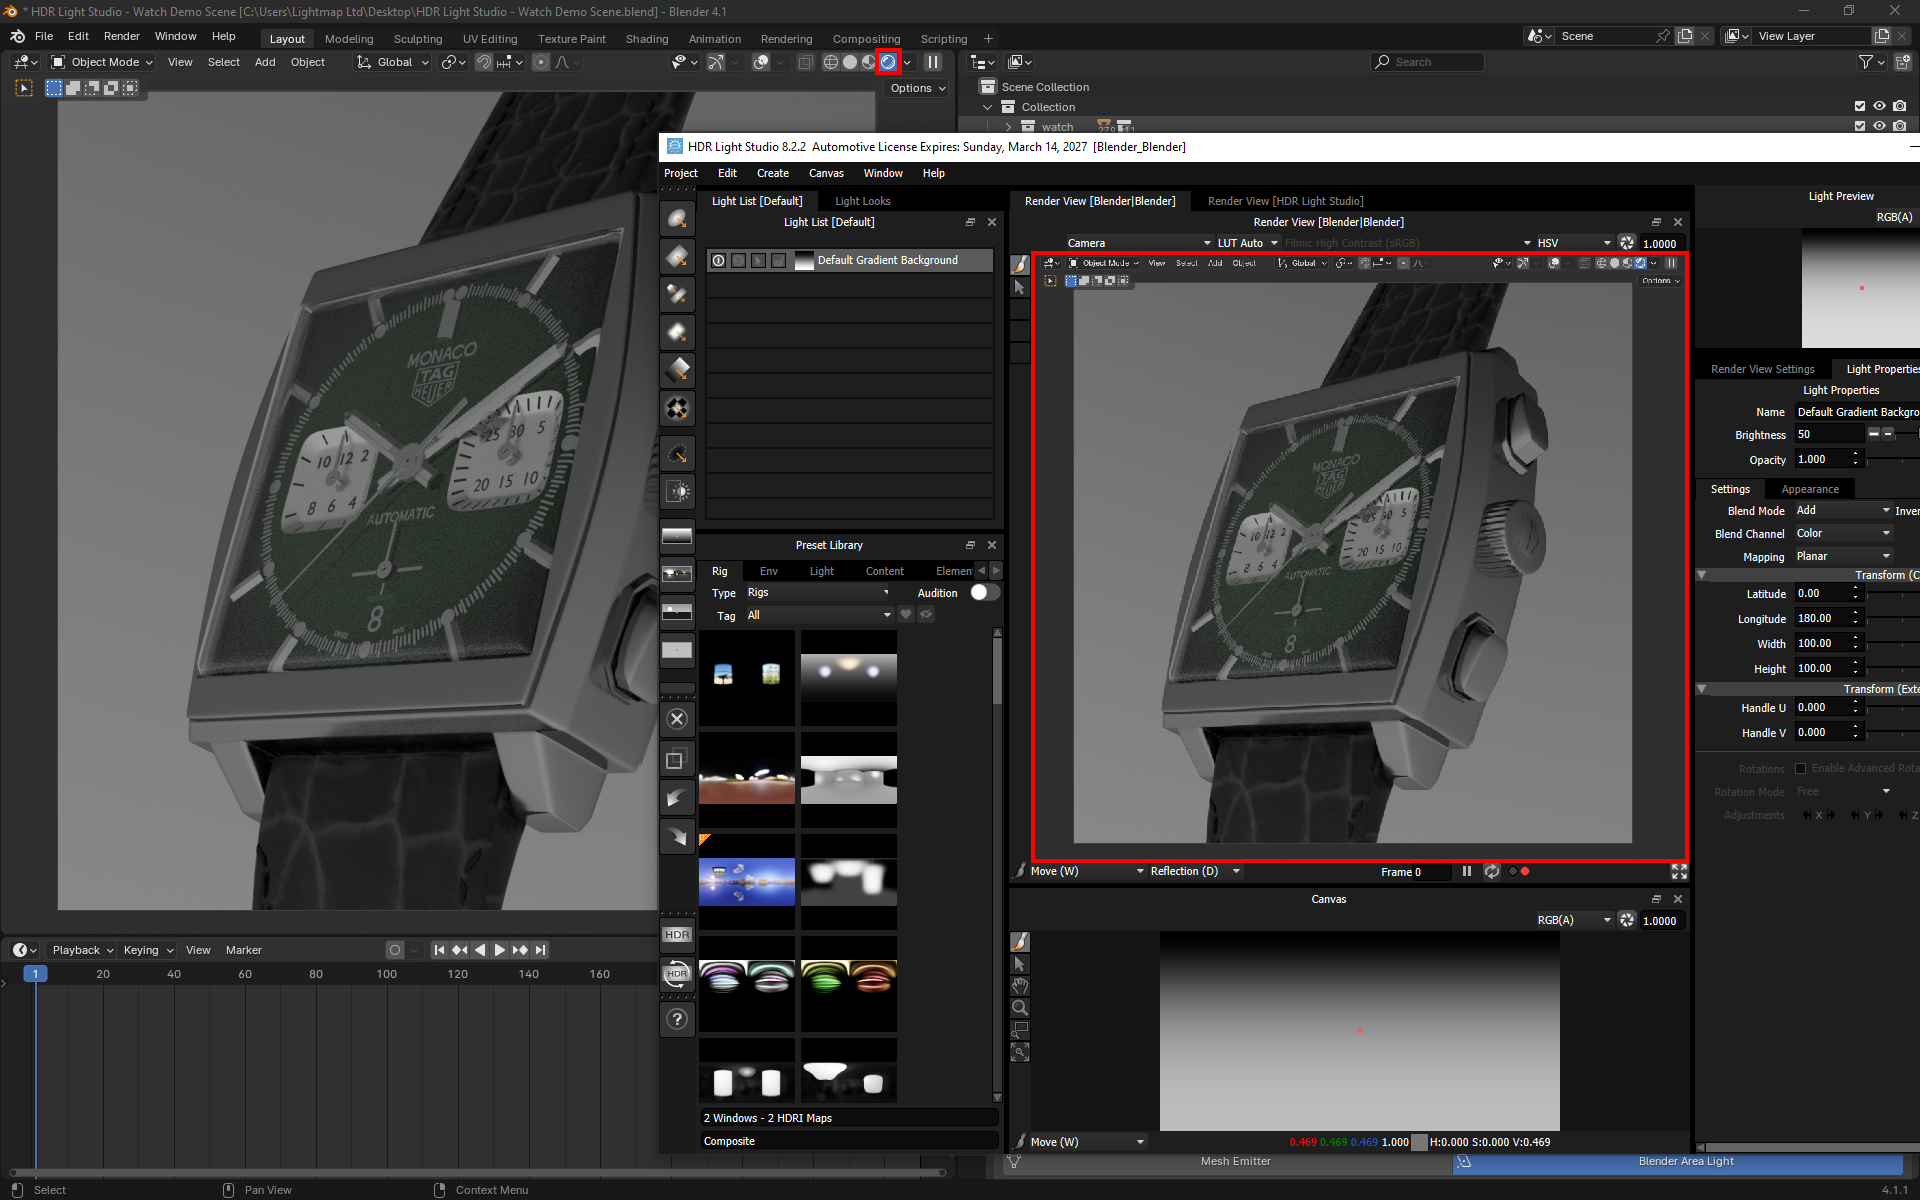 Figure 6: Blender Viewport streaming into HDR Light Studio interface